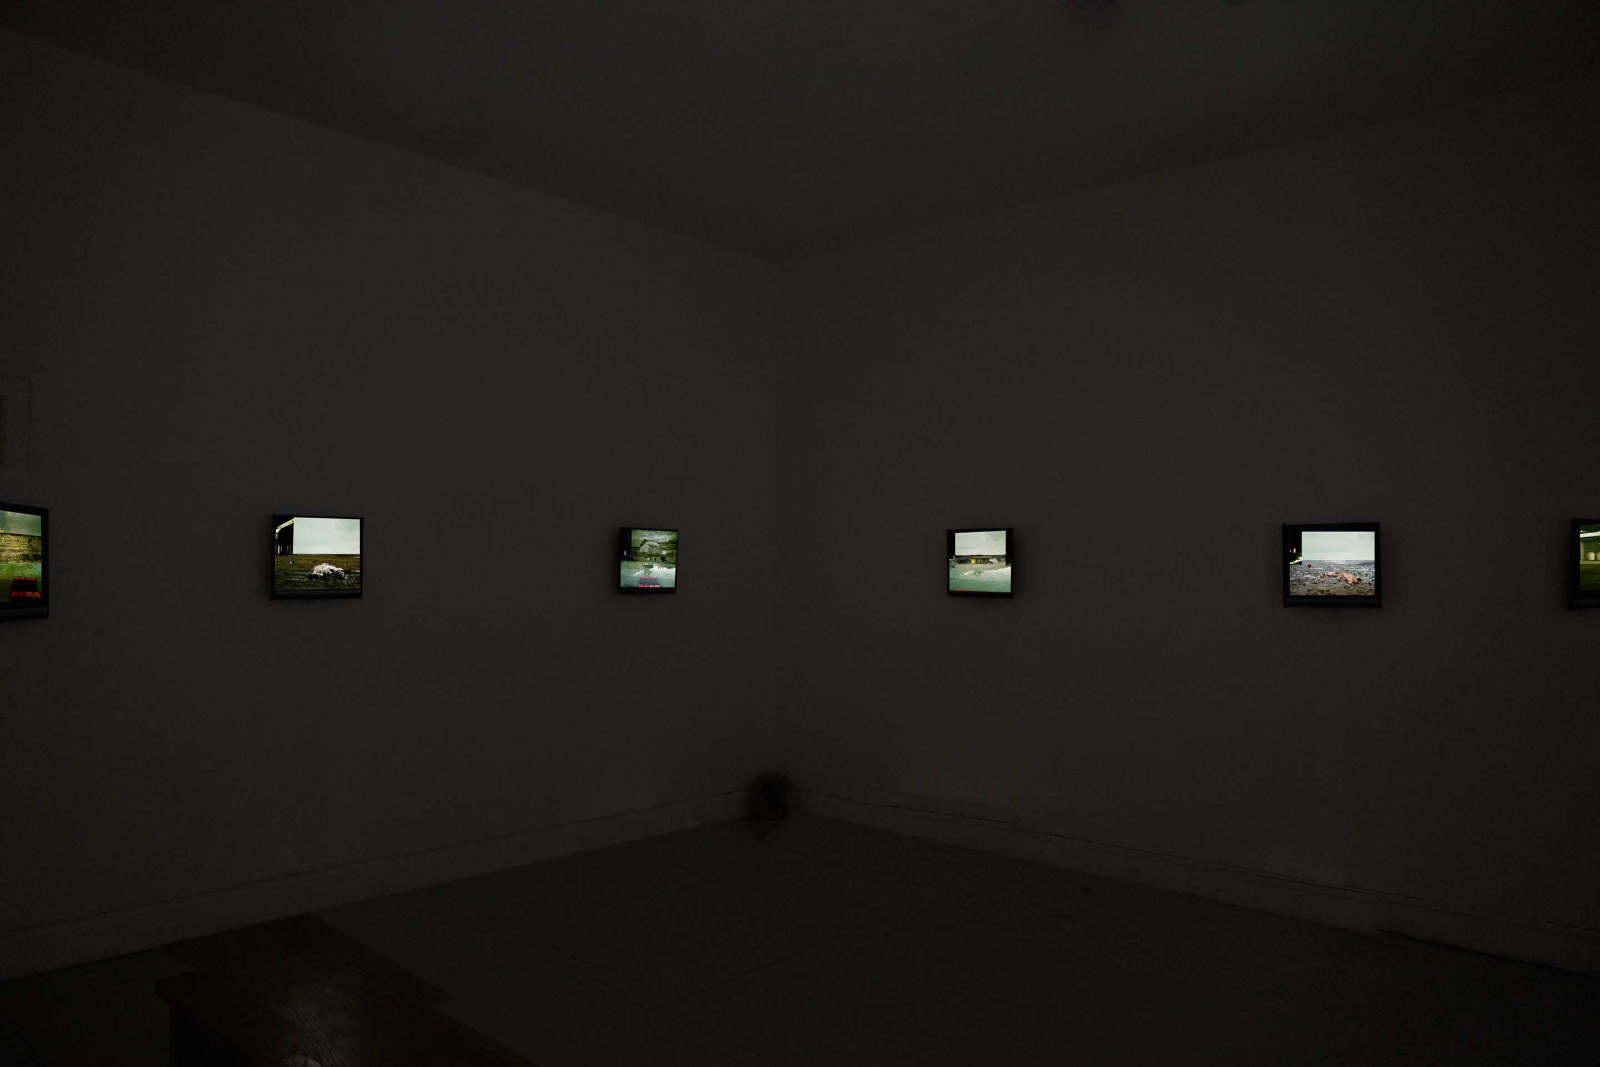 Galway Arts Centre, Ireland, 2010 (solo show). Curated by Maeve Mulrennan.